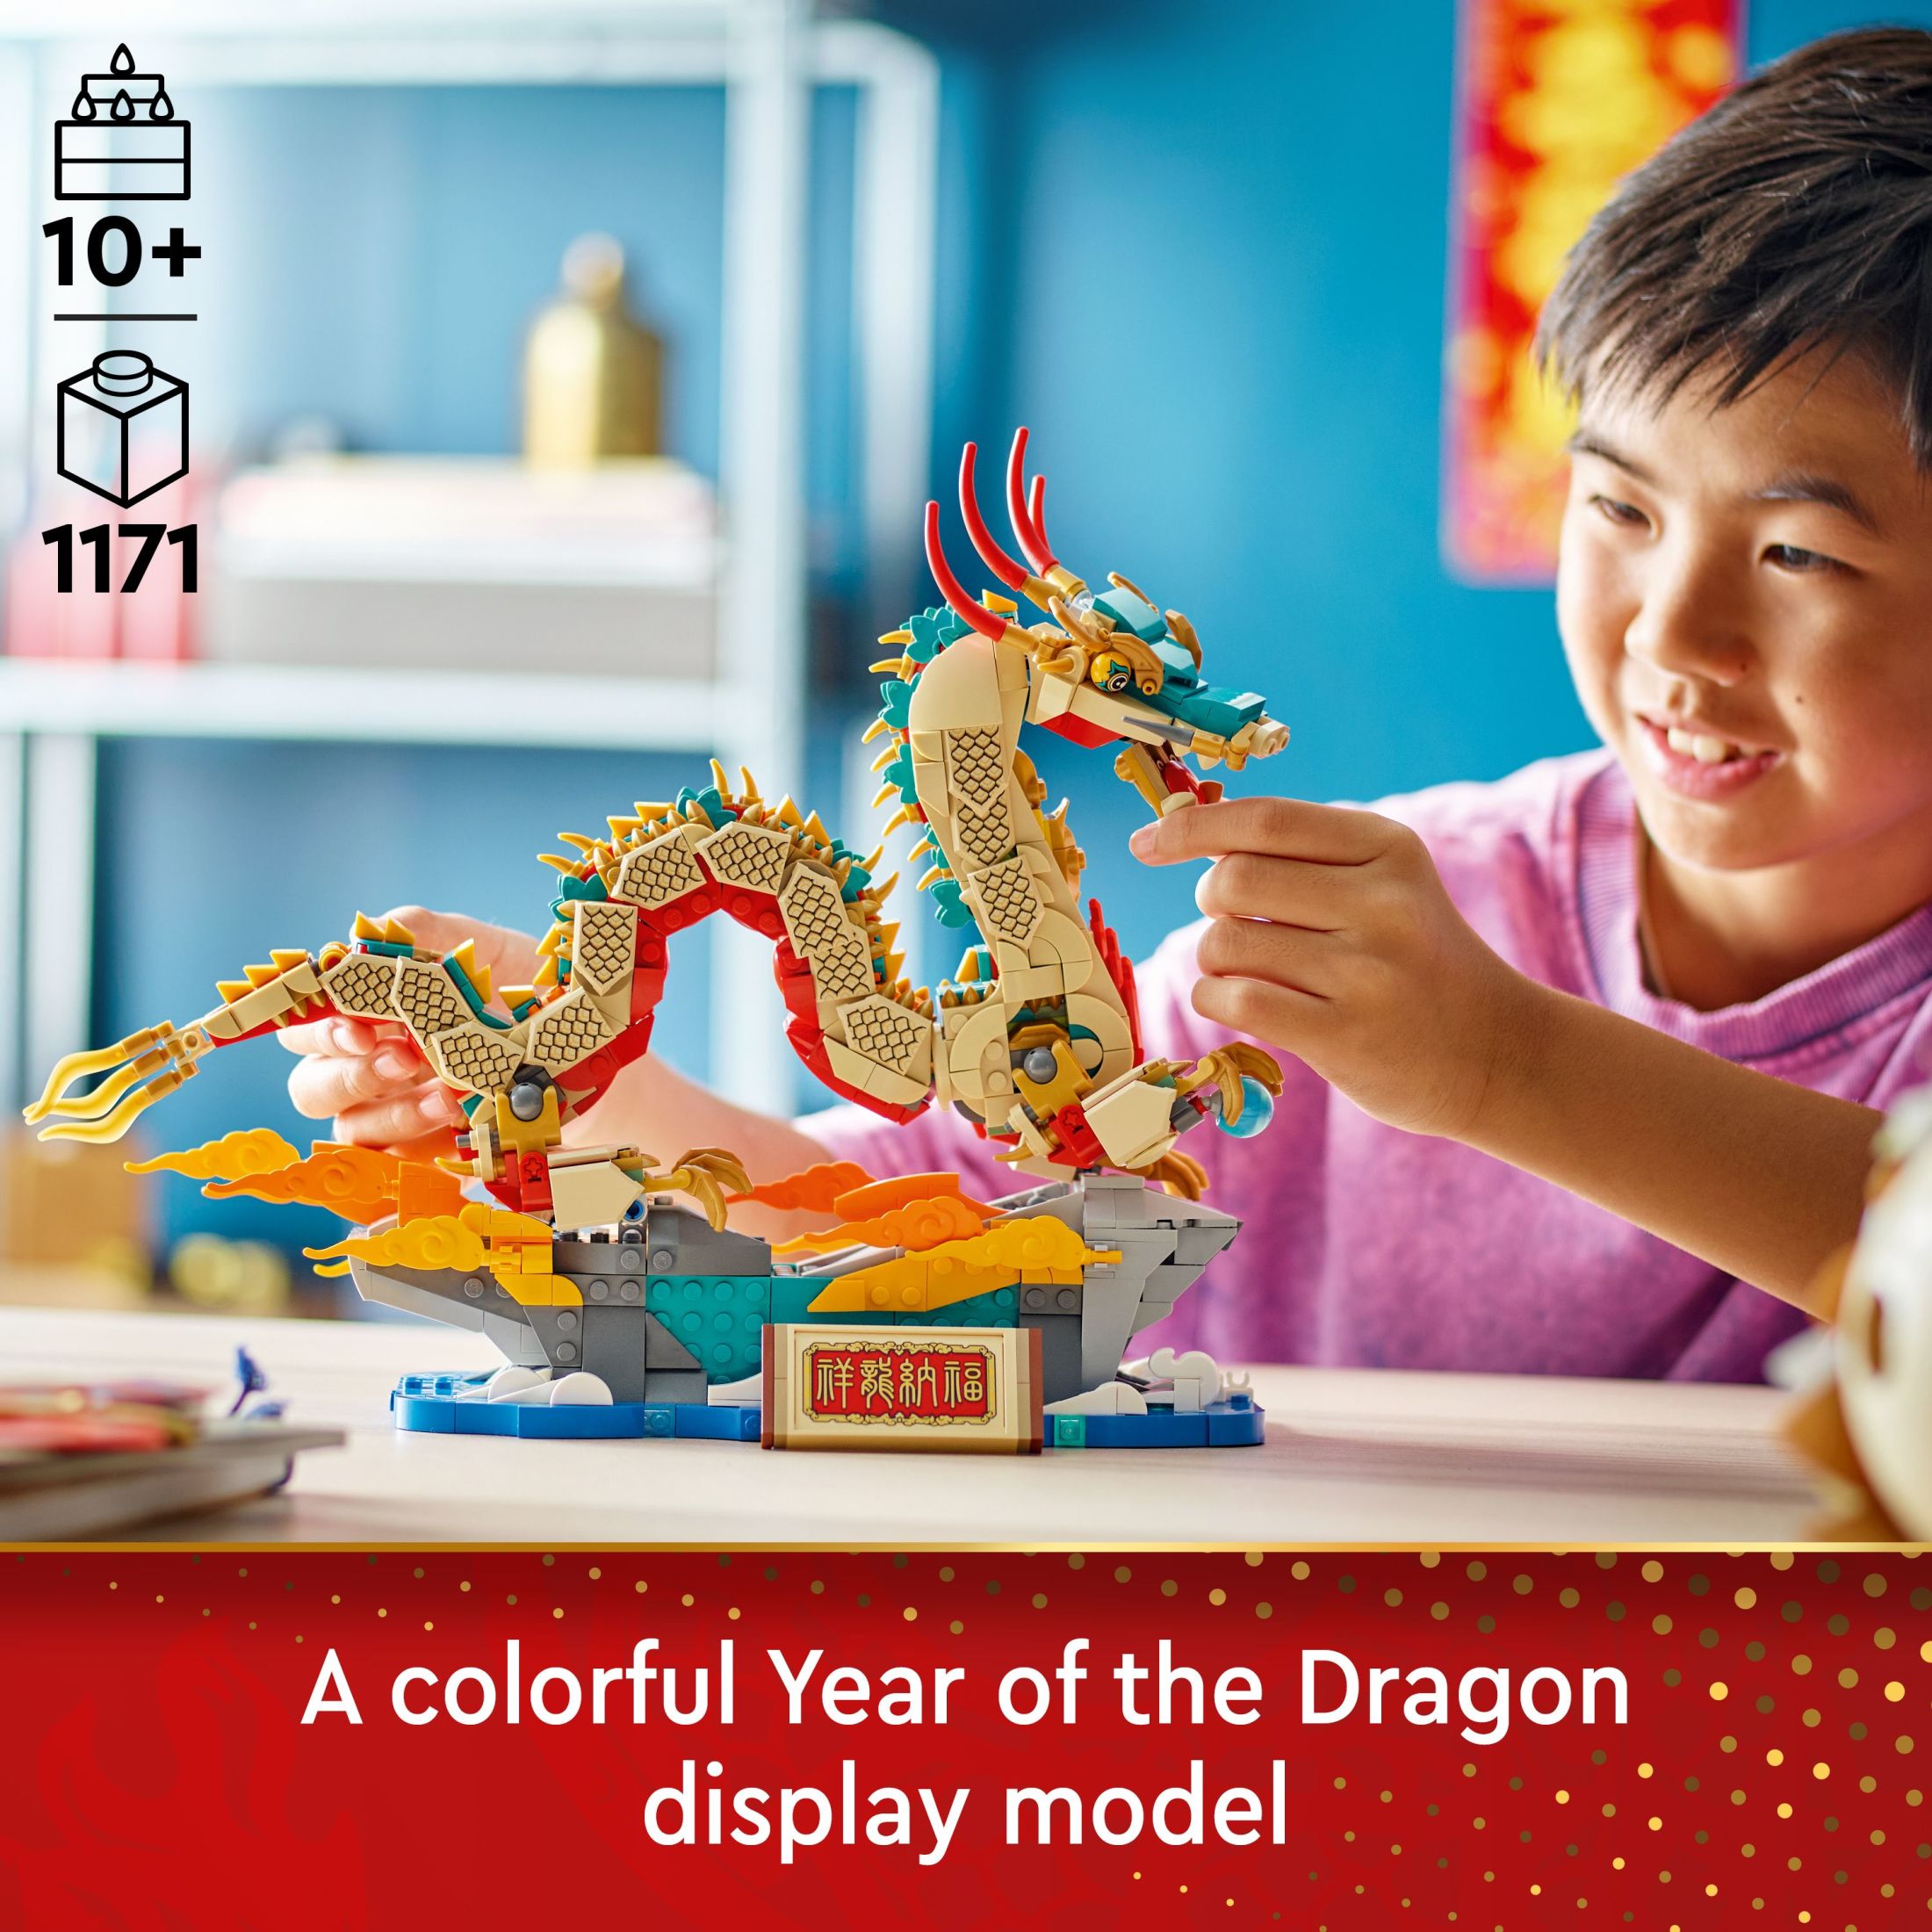 LEGO Spring Festival Auspicious Dragon Buildable Figure, Educational Toy for Kids, Dragon Toy Building Set, Great Spring Festival Decoration or Unique Gift for Boys and Girls Ages 10 and Up, 80112 - image 4 of 9